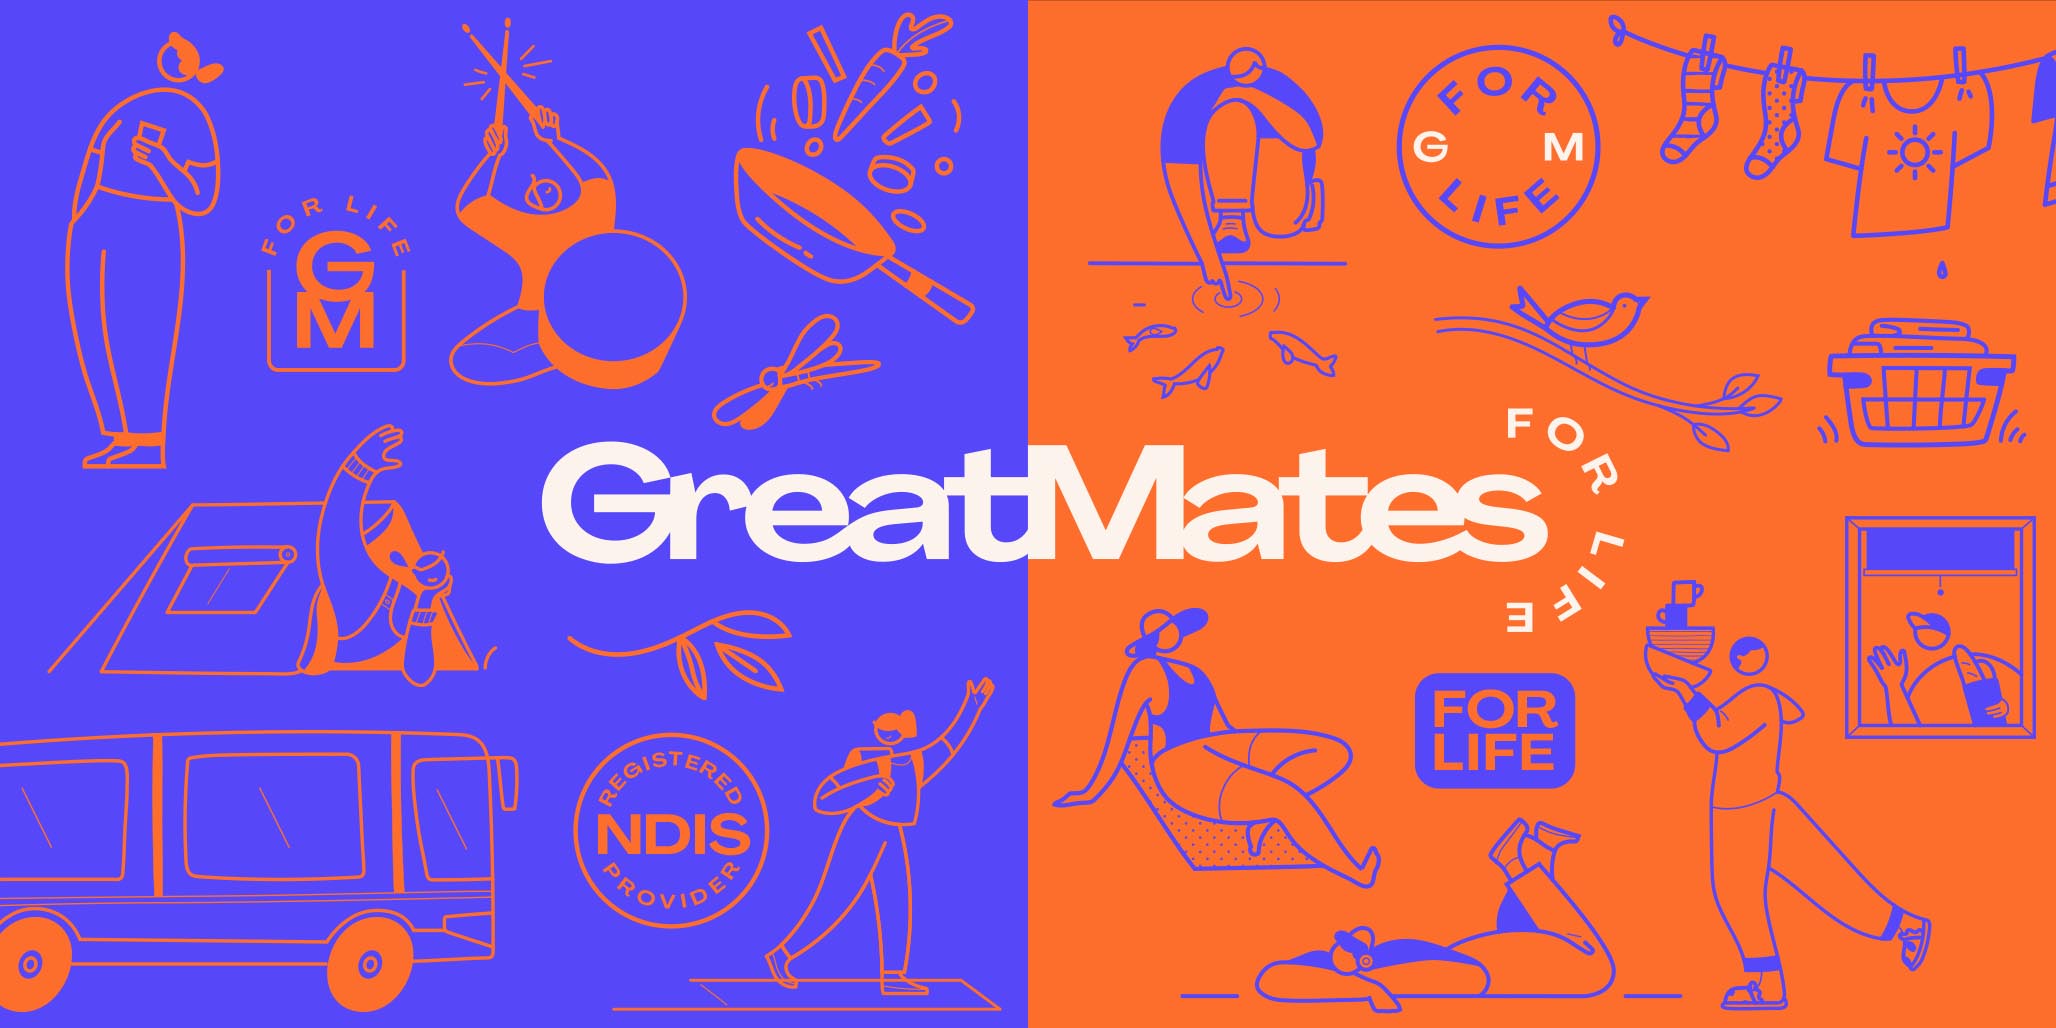 Brand Identity for Great Mates in Queensland, Australia, by Percept Brand Design, image A